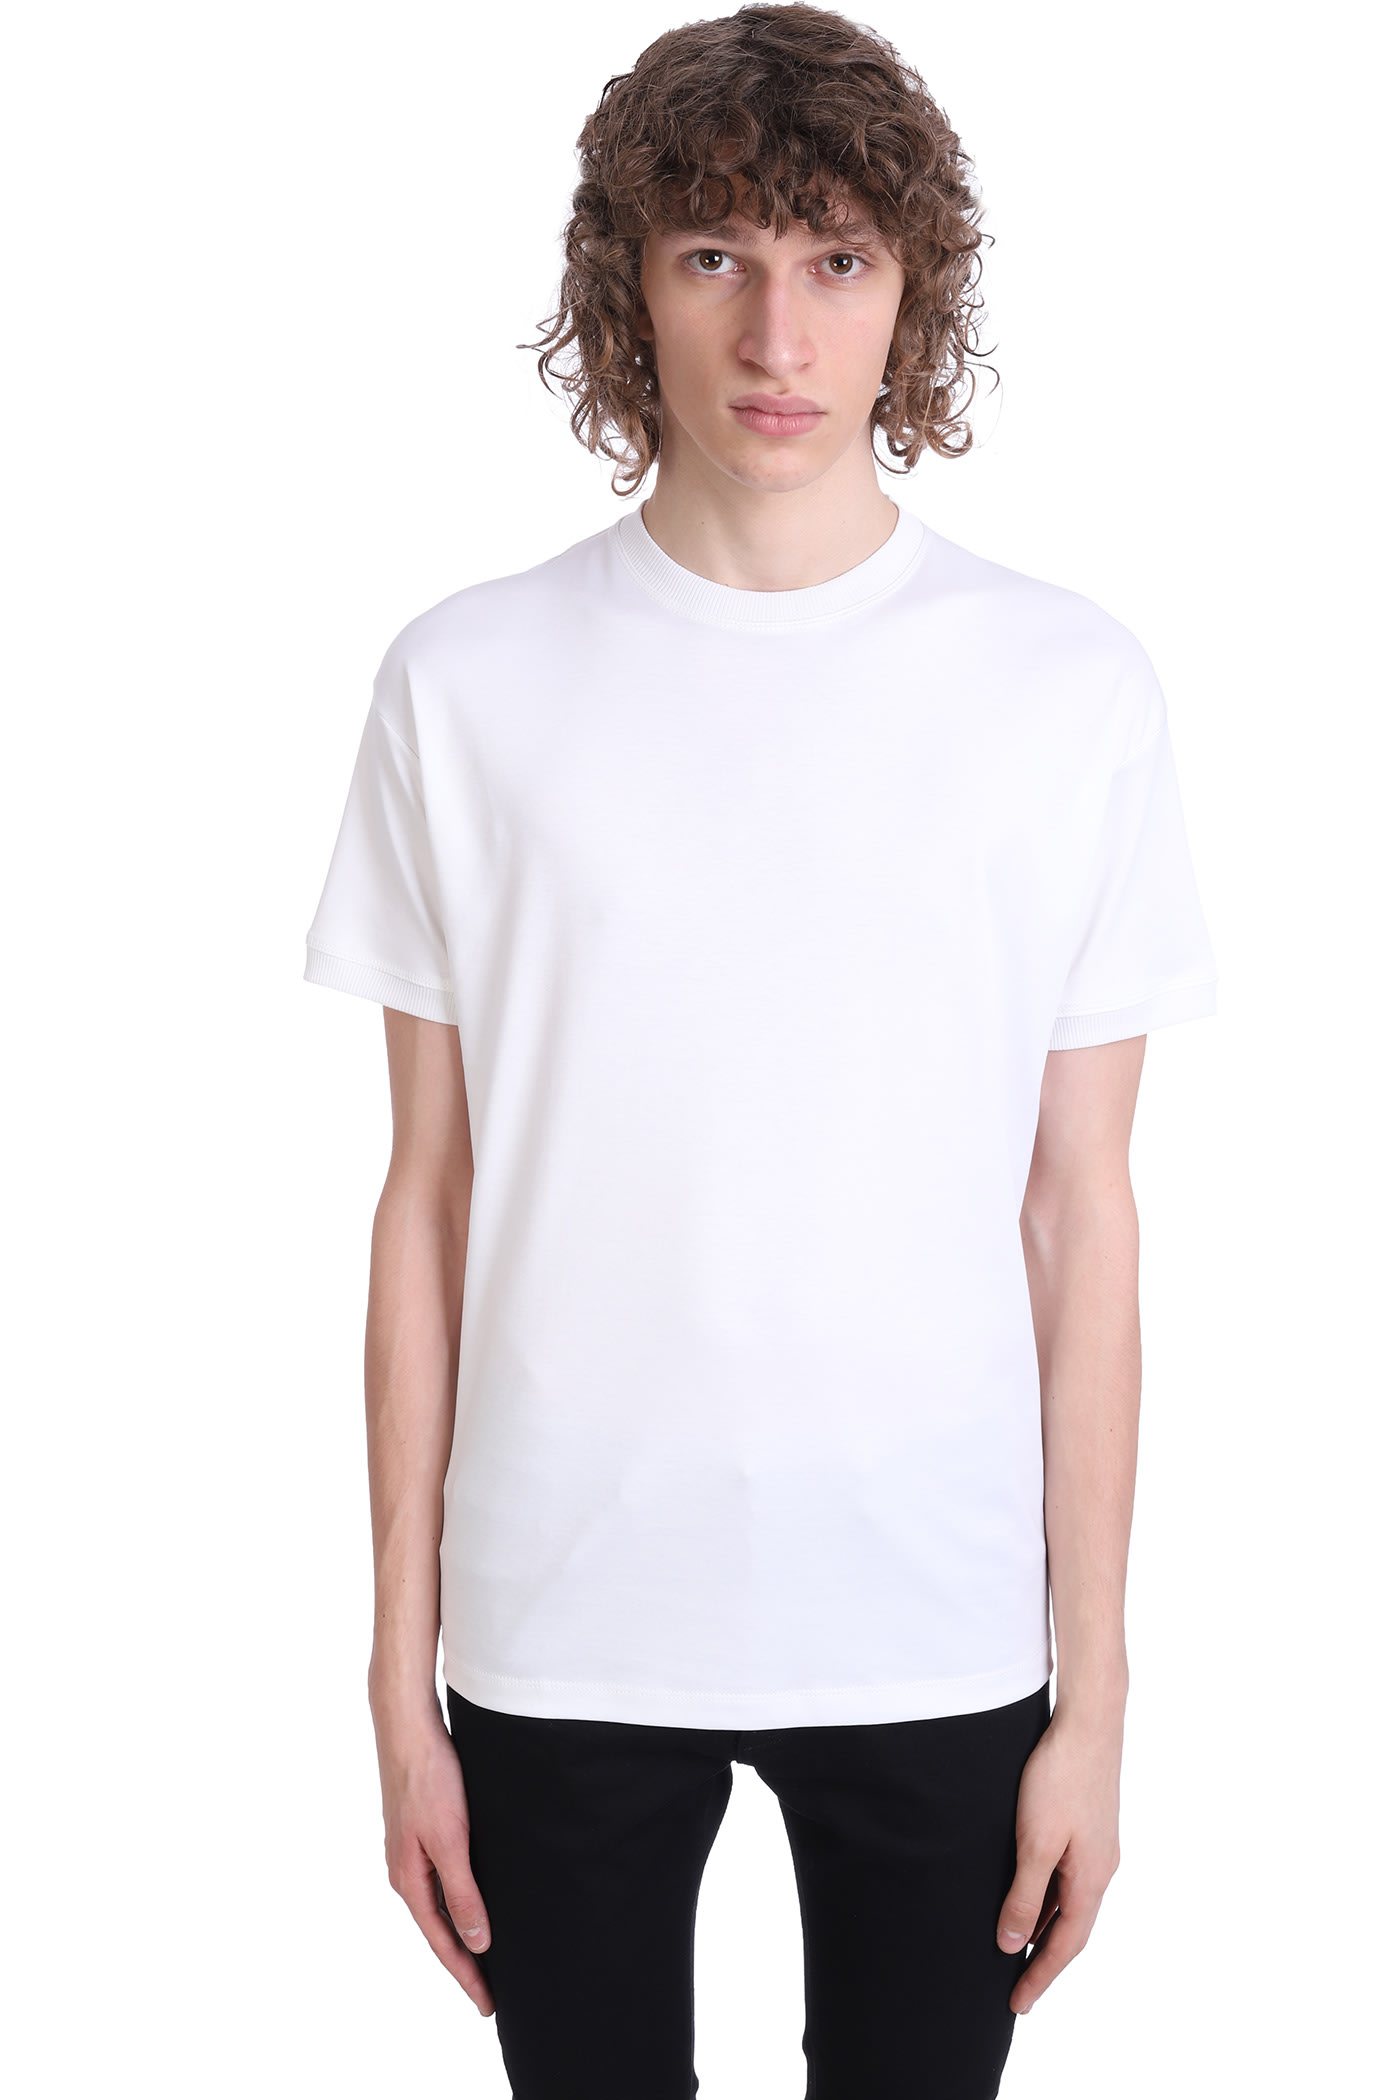 Jacob Lee T-shirt In White Cotton